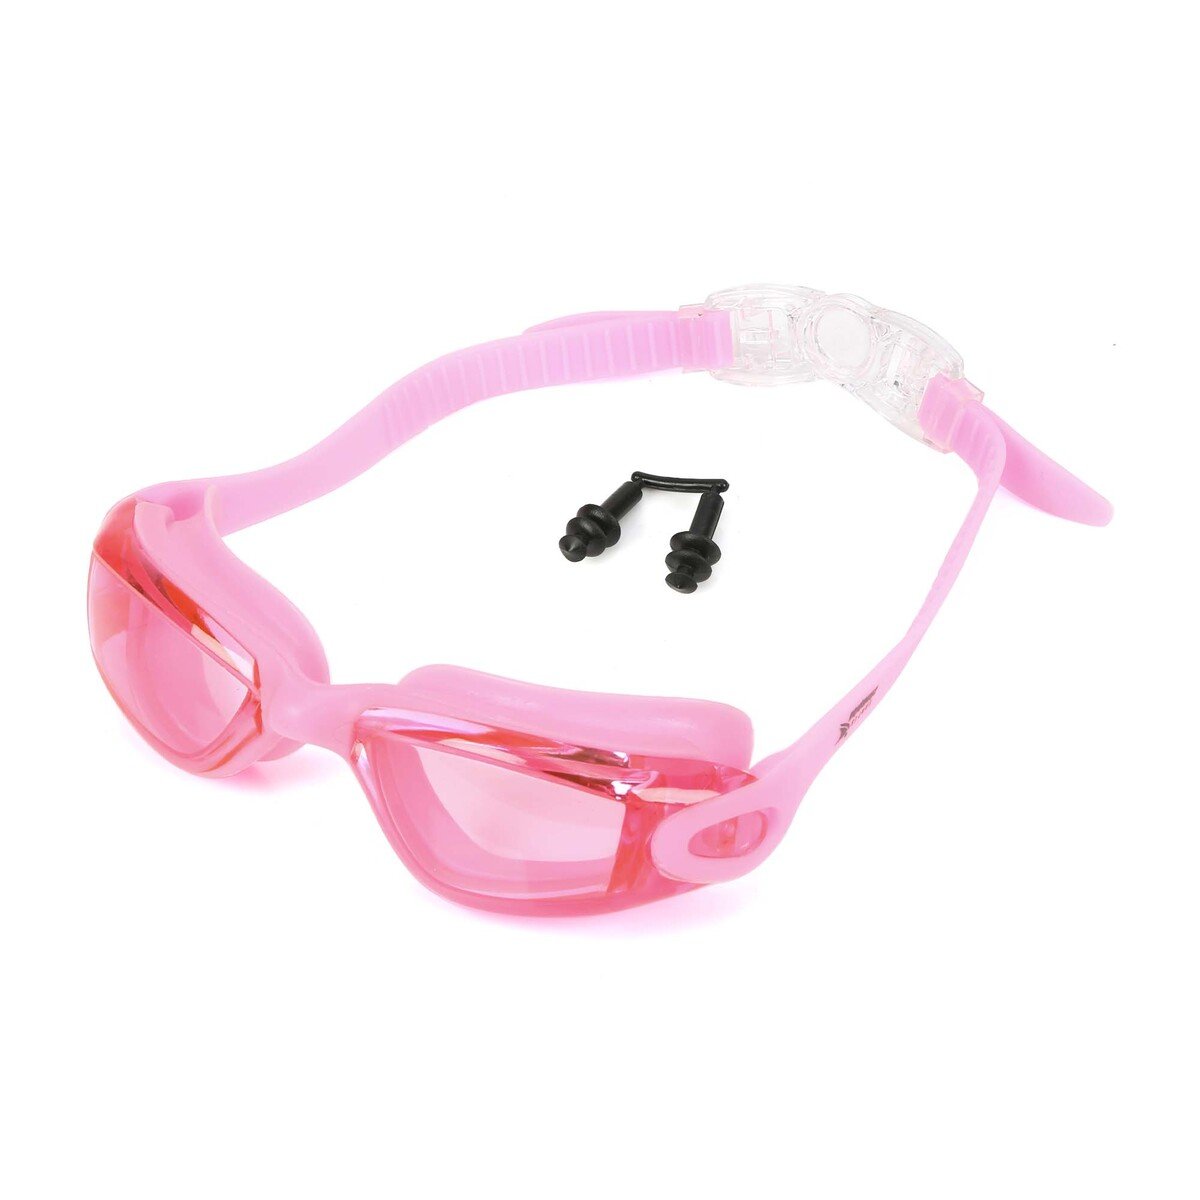 Sports Champion Swimming Goggles AF-200, 1Piece, Assorted Color & Design